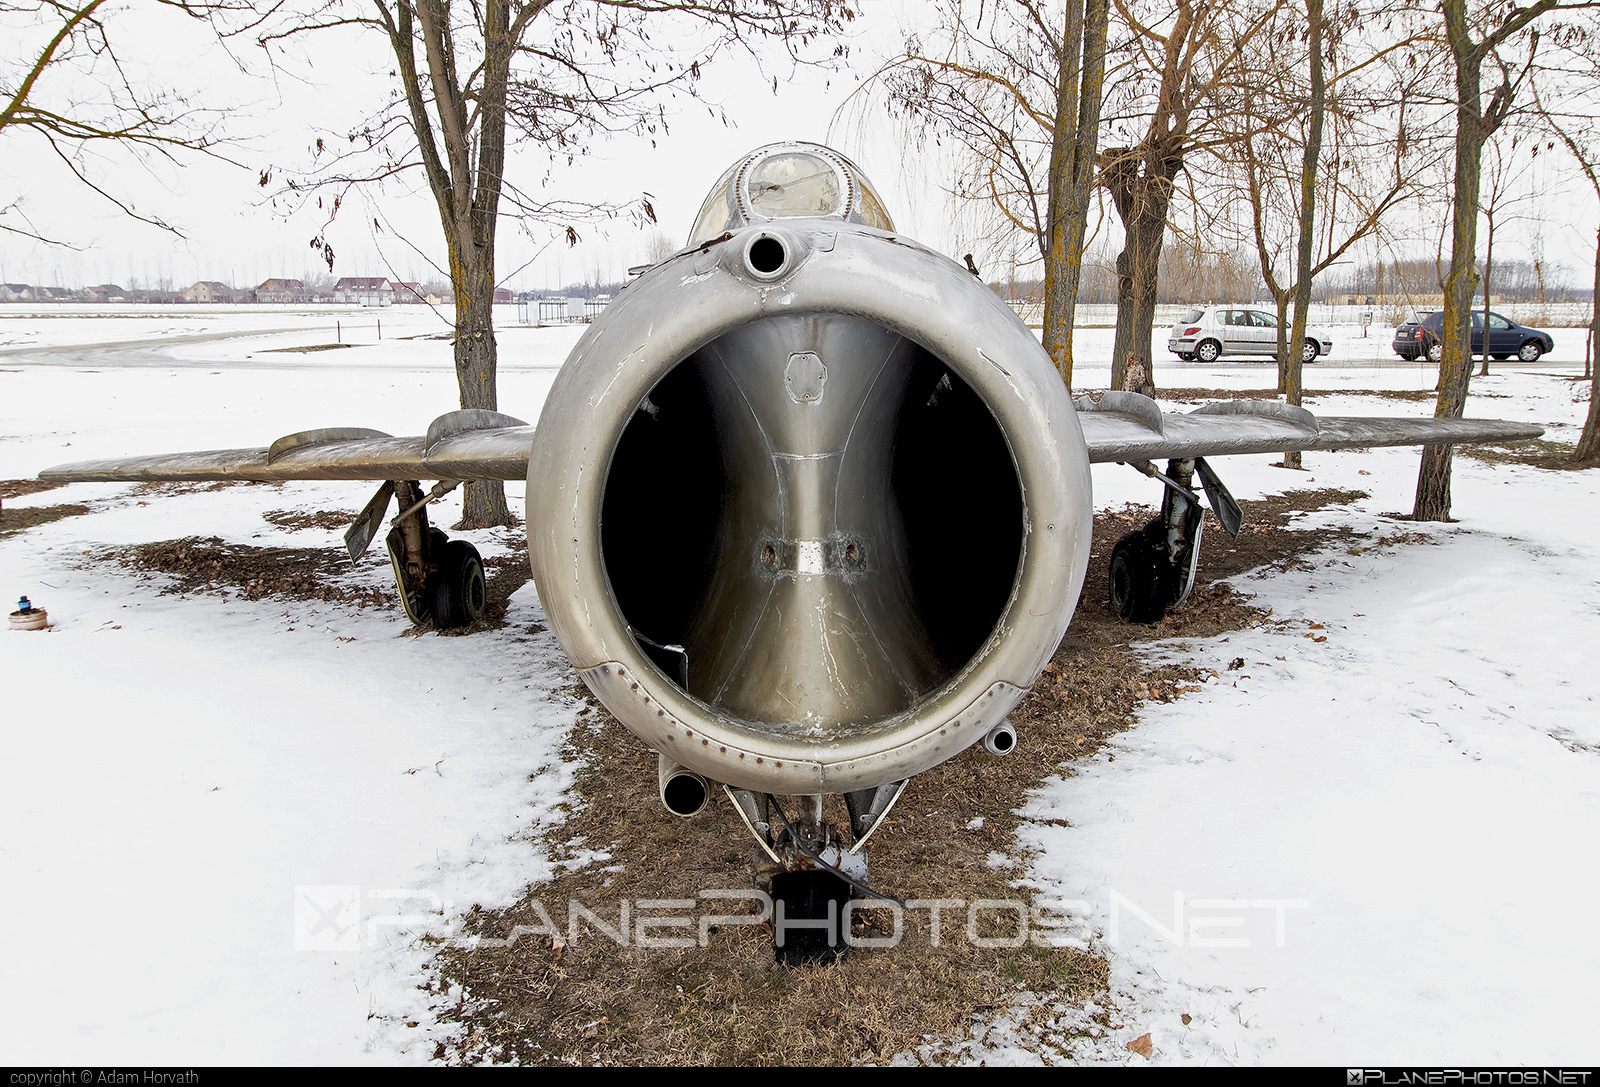 Mikoyan-Gurevich MiG-15bis - 814 operated by Magyar Néphadsereg (Hungarian People's Army) #hungarianpeoplesarmy #magyarnephadsereg #mig #mig15 #mig15bis #mikoyangurevich